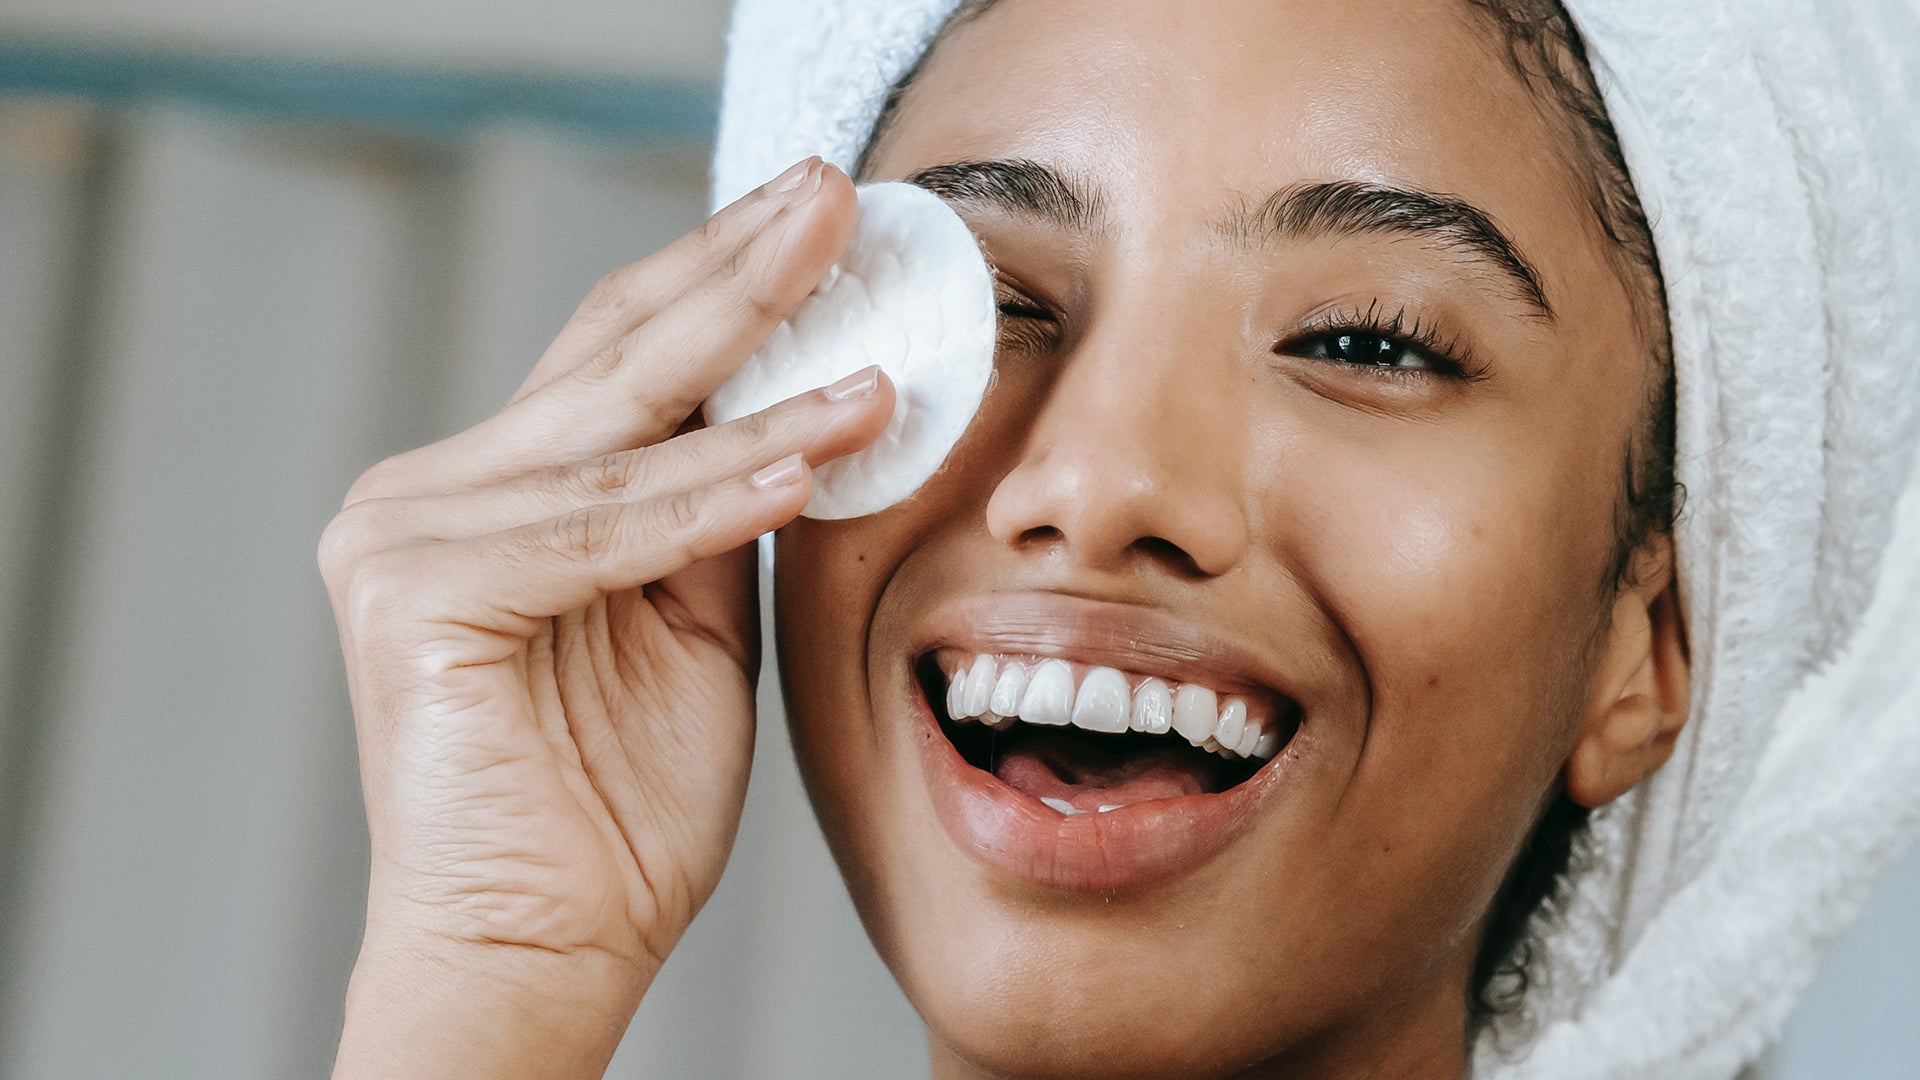 10 Amazon Prime Day Skincare Items You Need While They’re On Sale